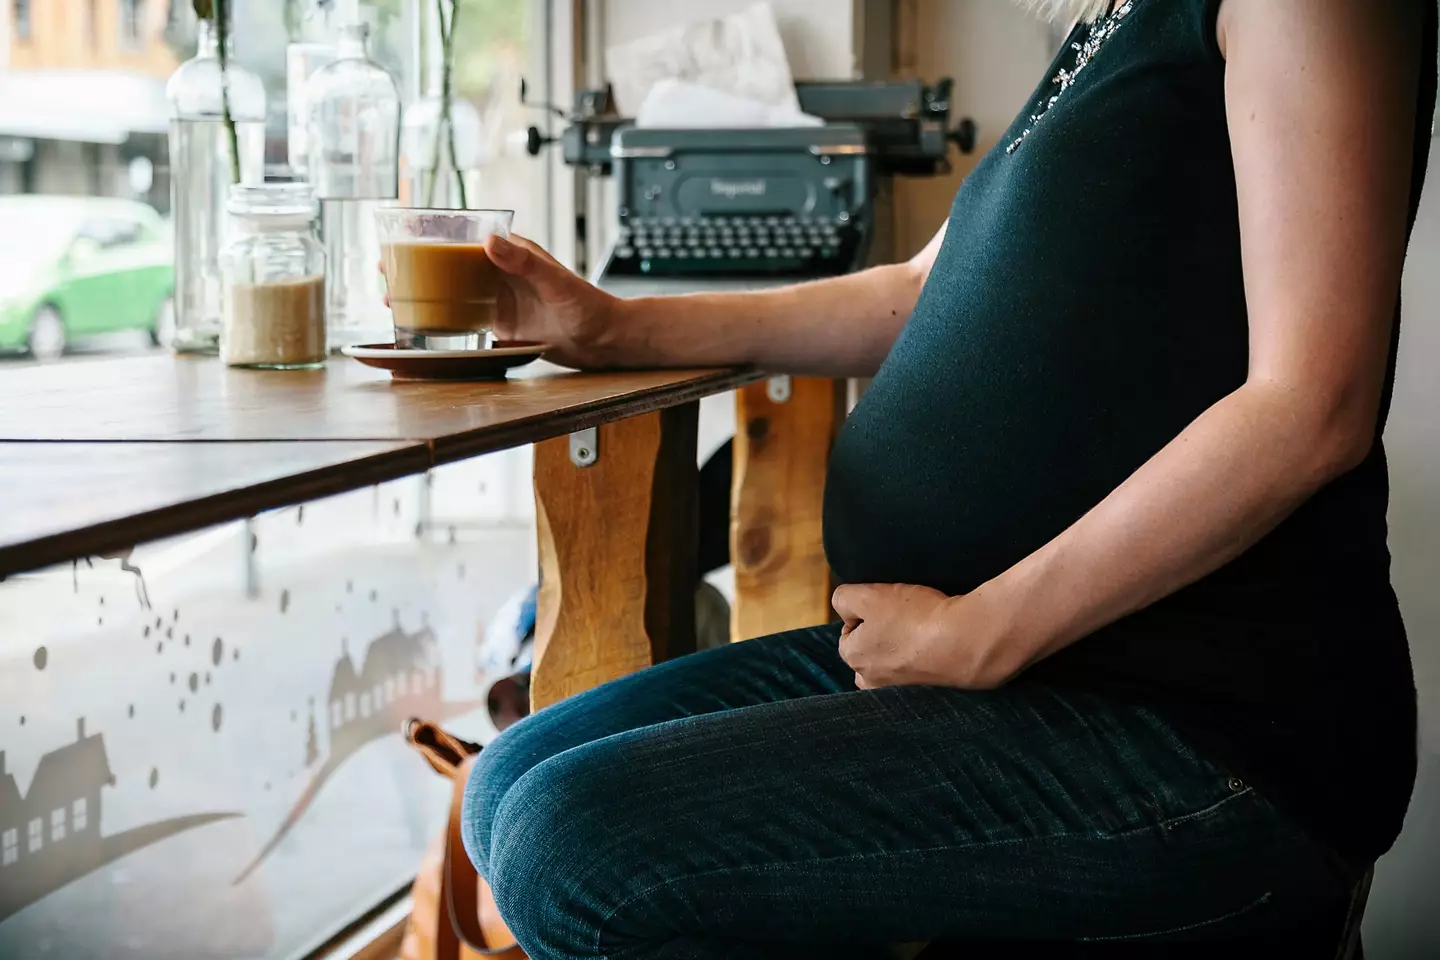 The teen spotted her dad with his pregnant mistress in a coffee shop.